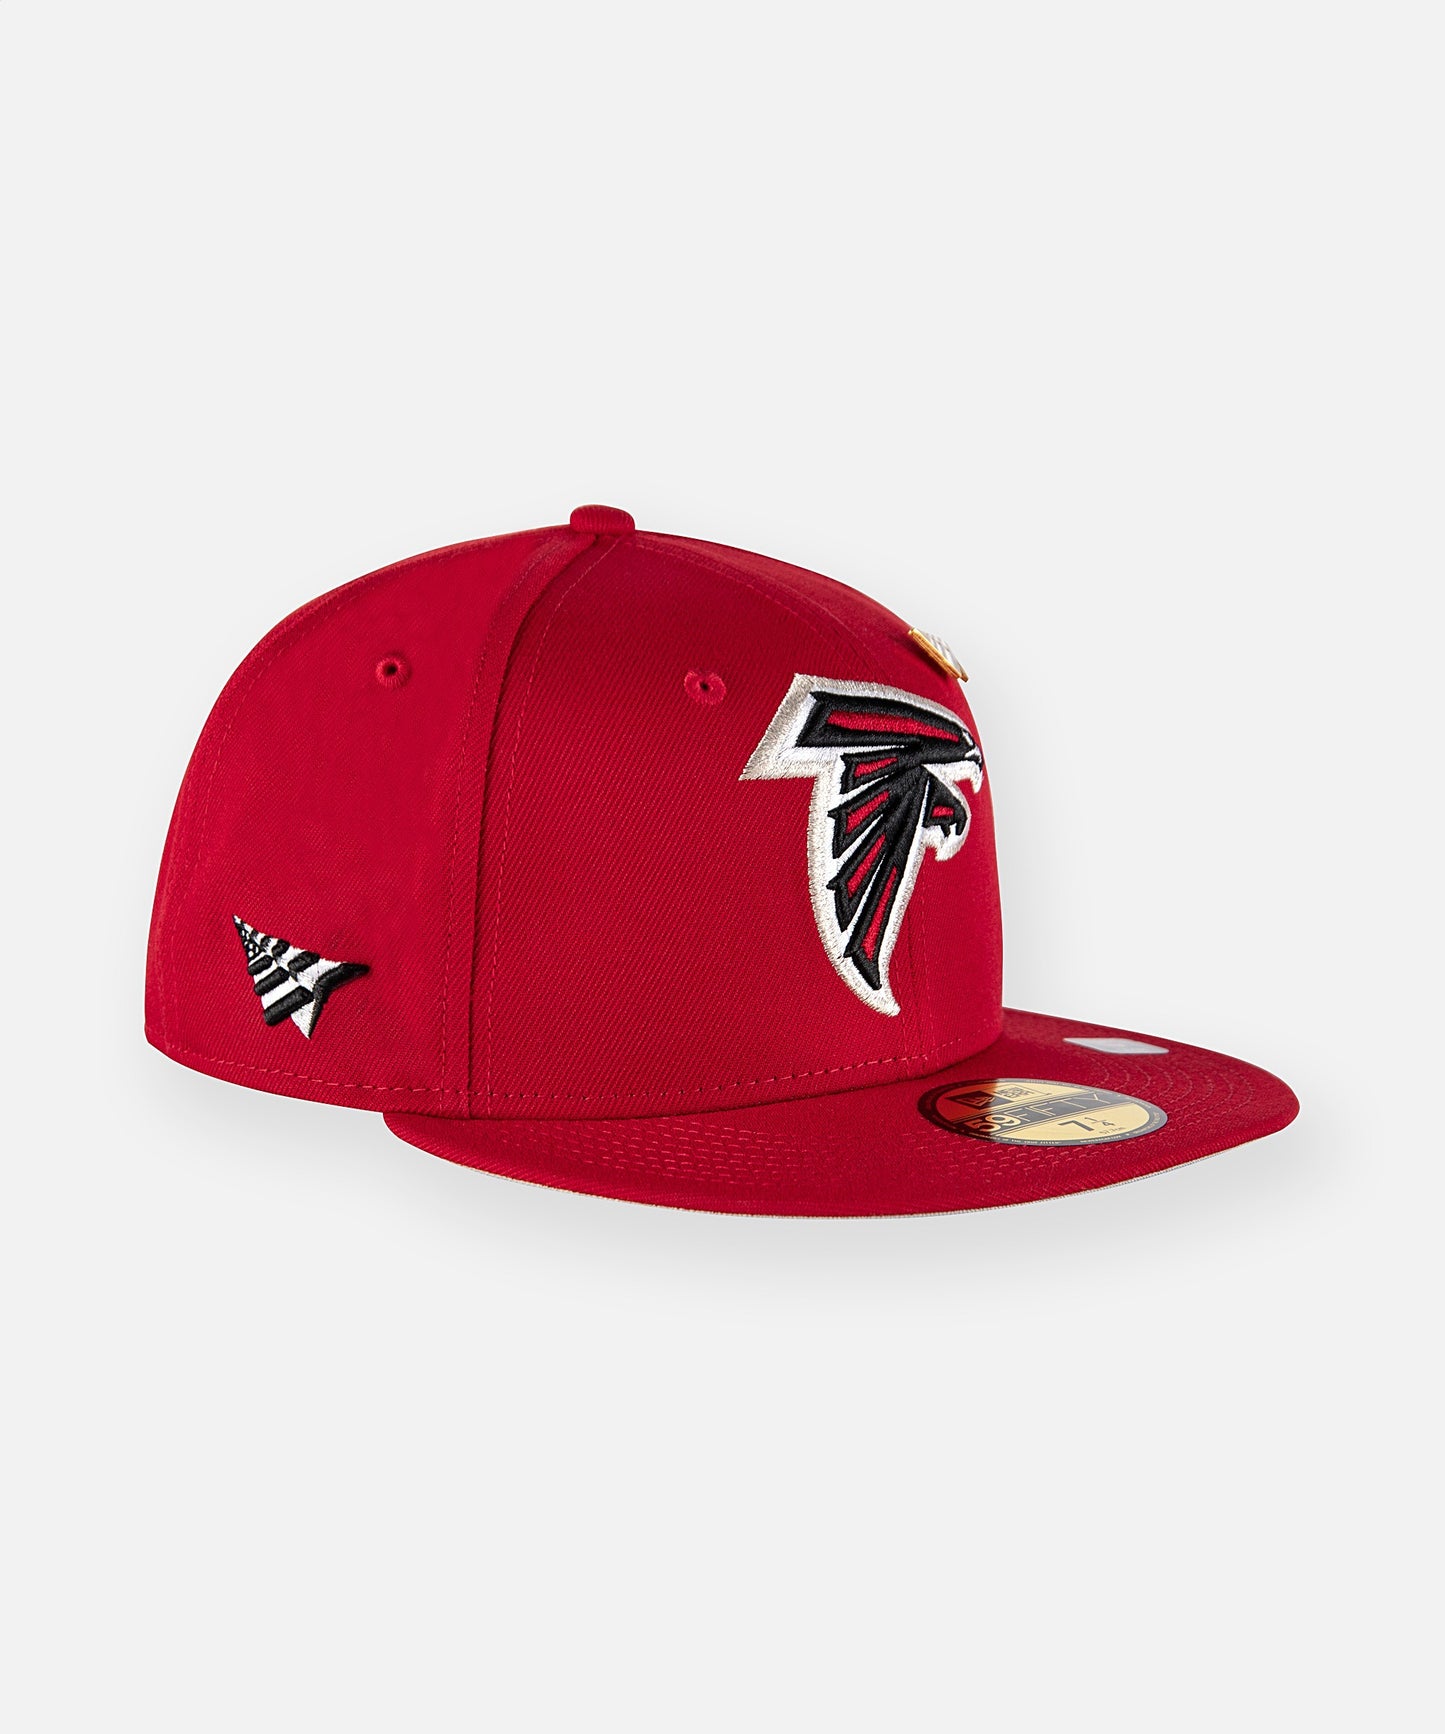 Paper Planes x Atlanta Falcons Team Color 59Fifty Fitted Hat